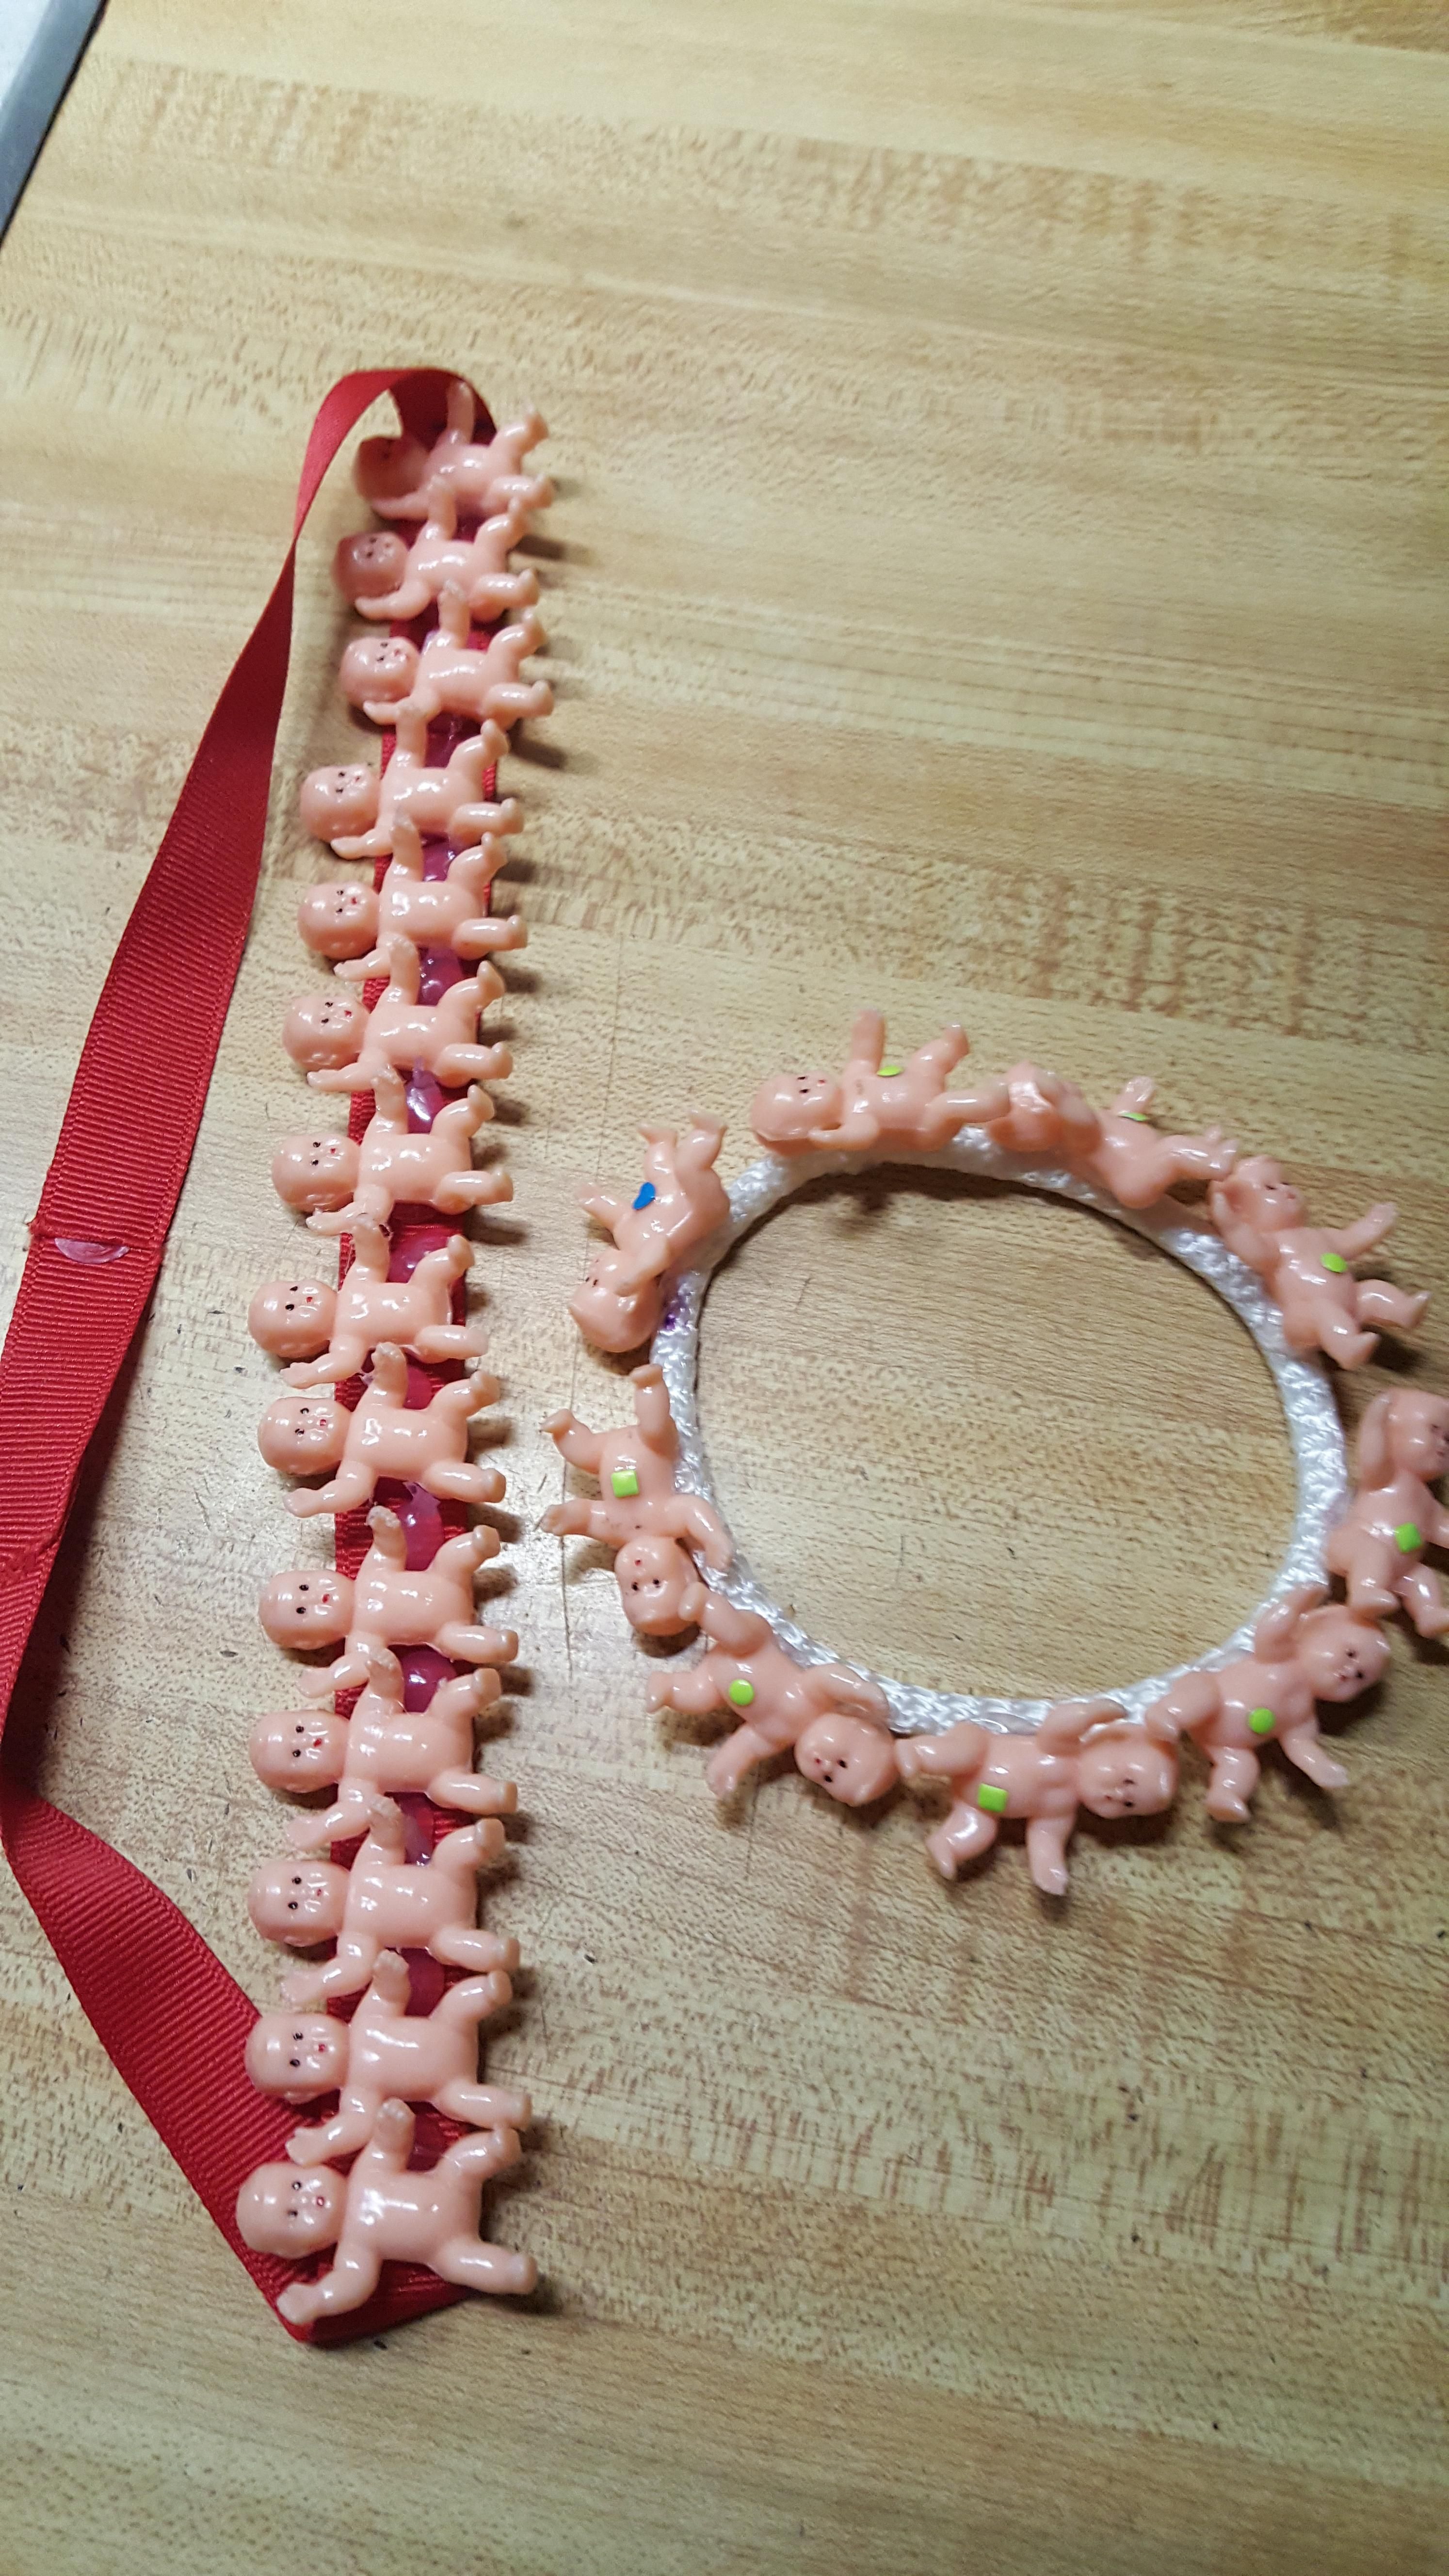 My 12 year old daughter now makes creepy baby jewelry.